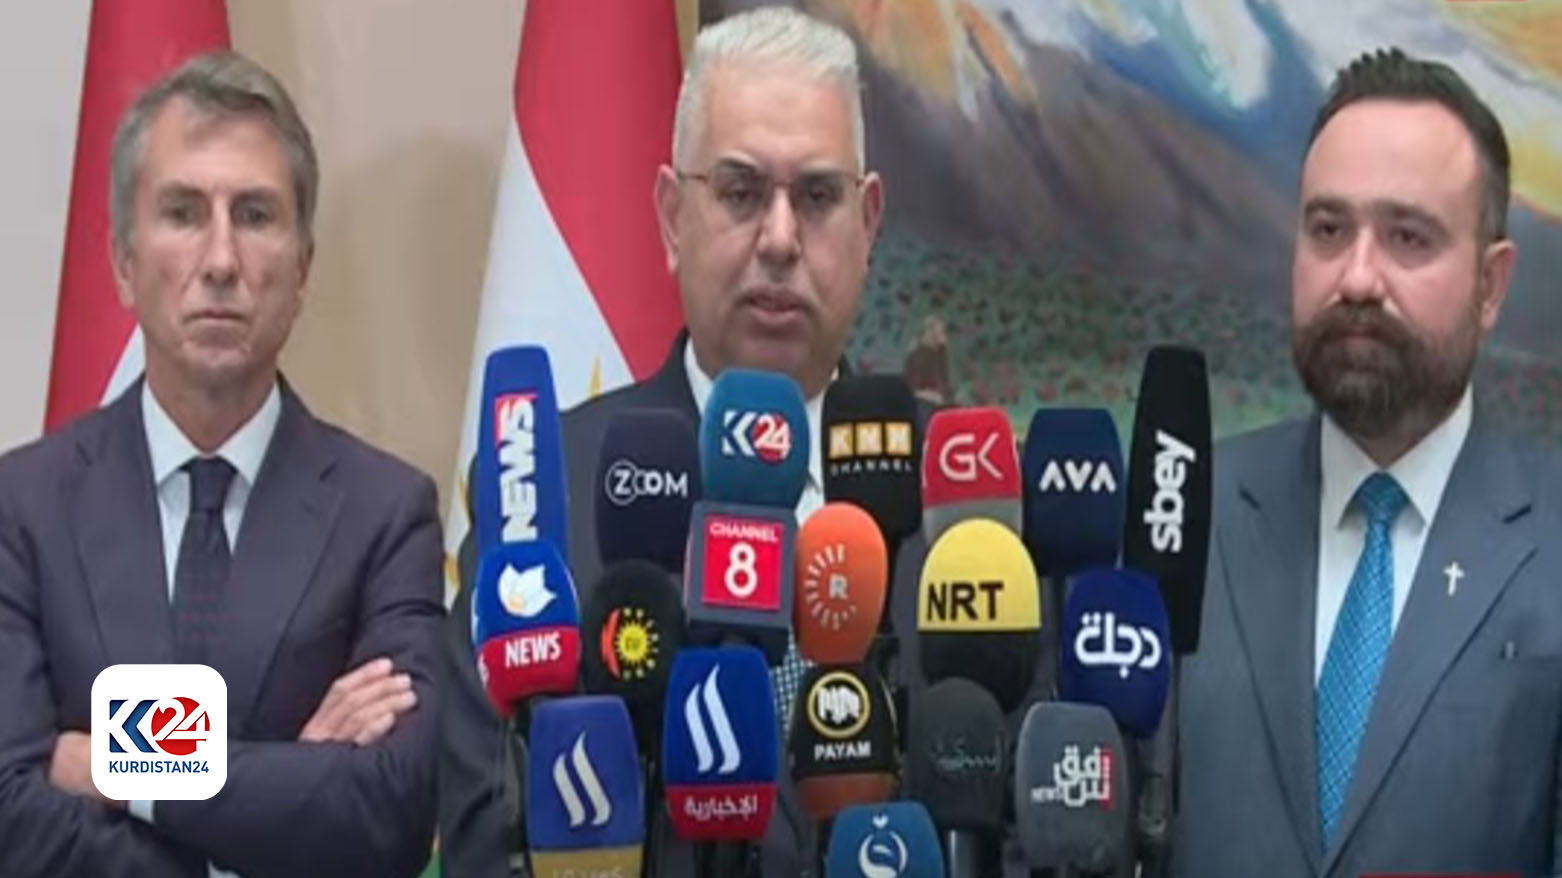 The joint press conference by KRG's Minister of Transportation and Communication Ano Jawhar and Youssef al-Kaabi, Director General of Iraqi Railways. (Photo: Kurdistan 24)